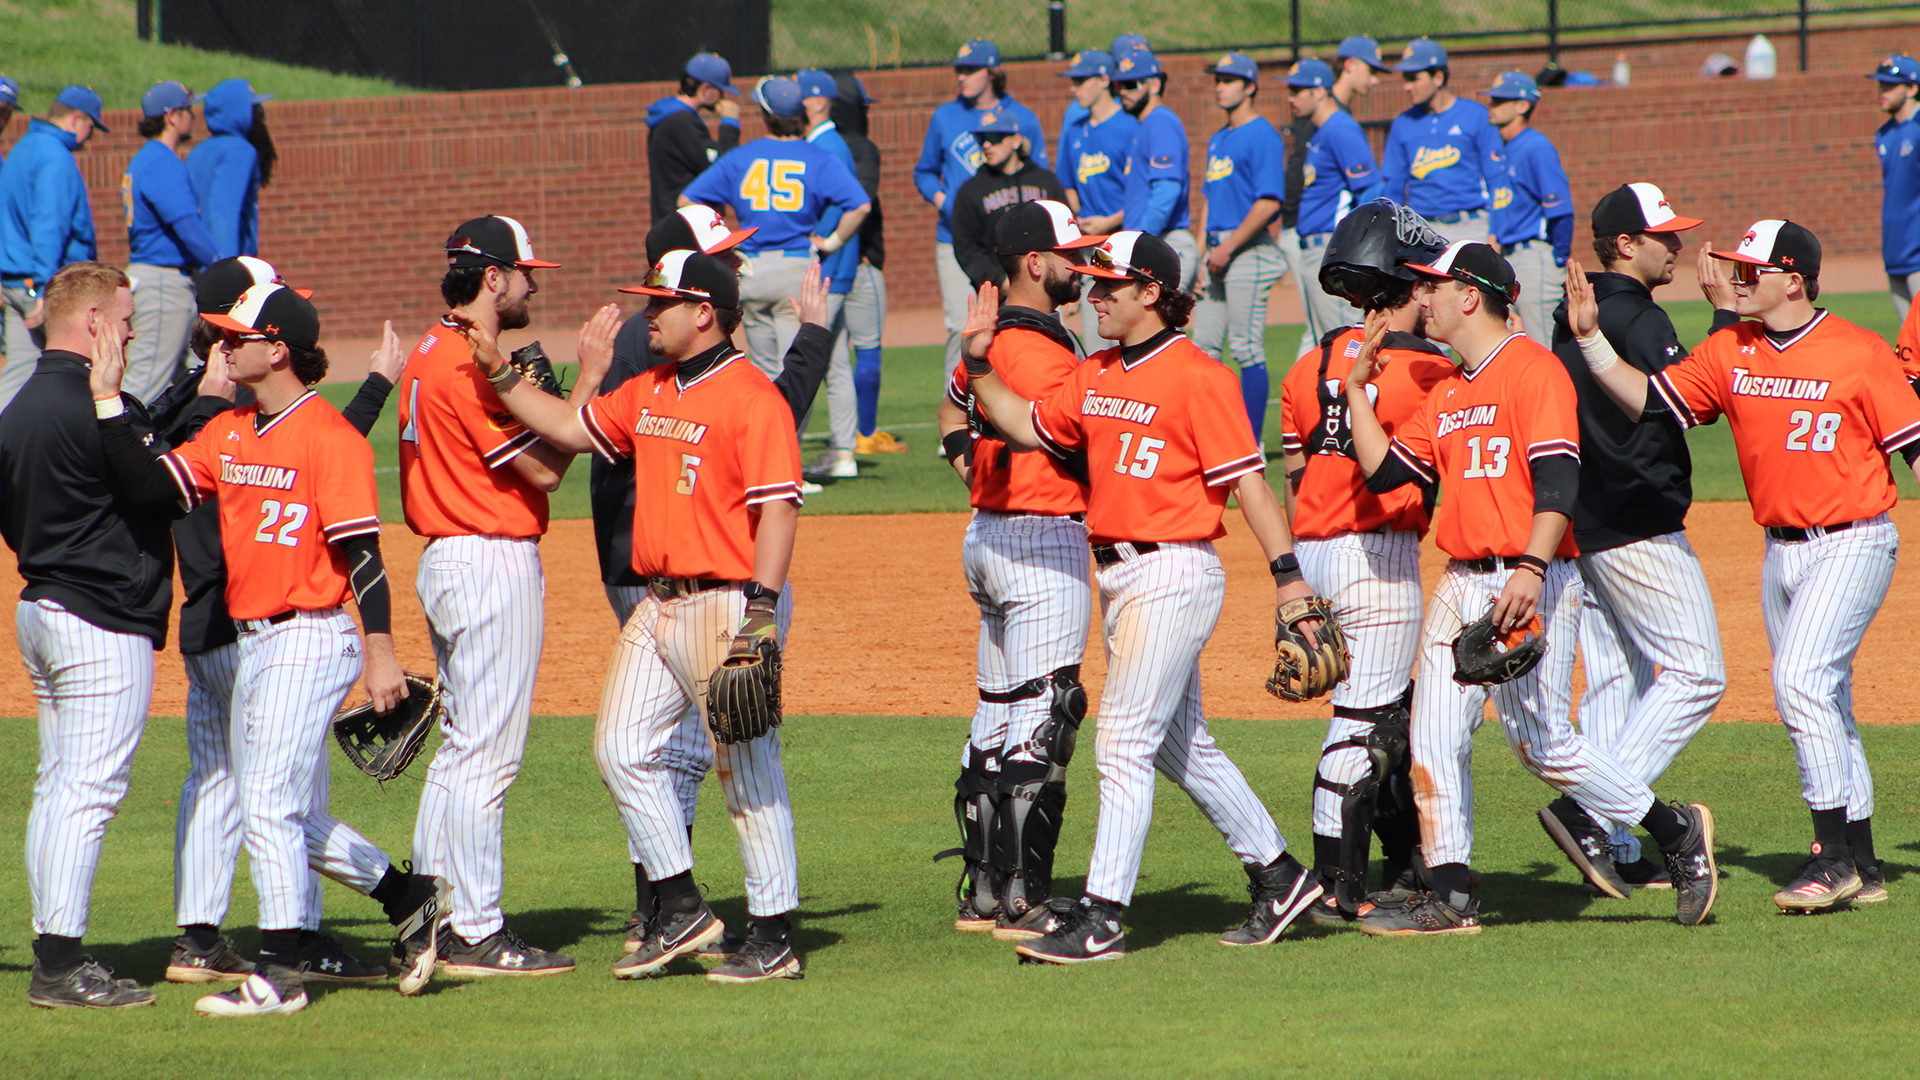 Pioneers complete series sweep with 10-6 win over Mars Hill